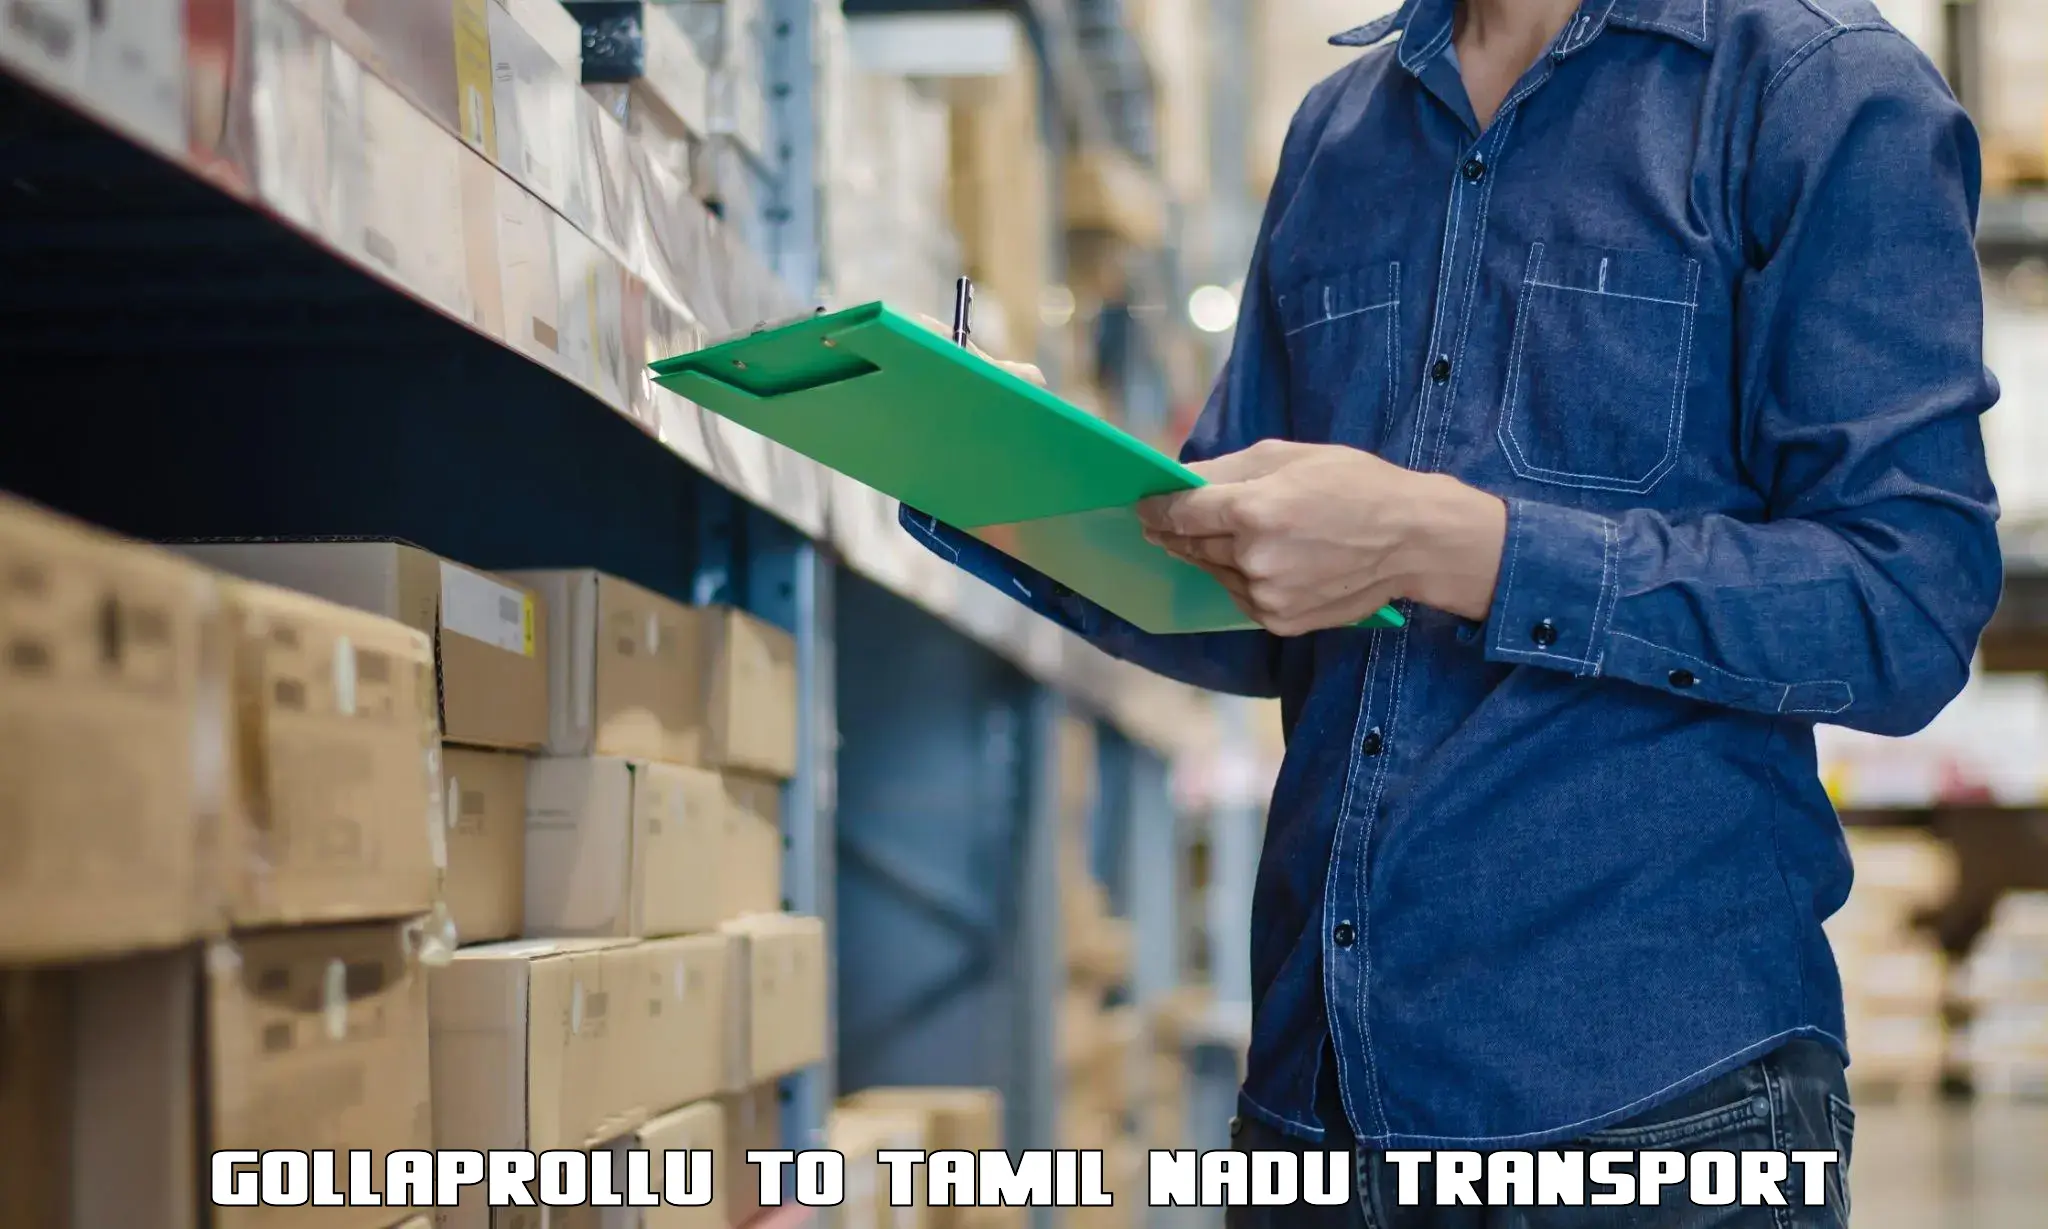 Inland transportation services Gollaprollu to Mylapore